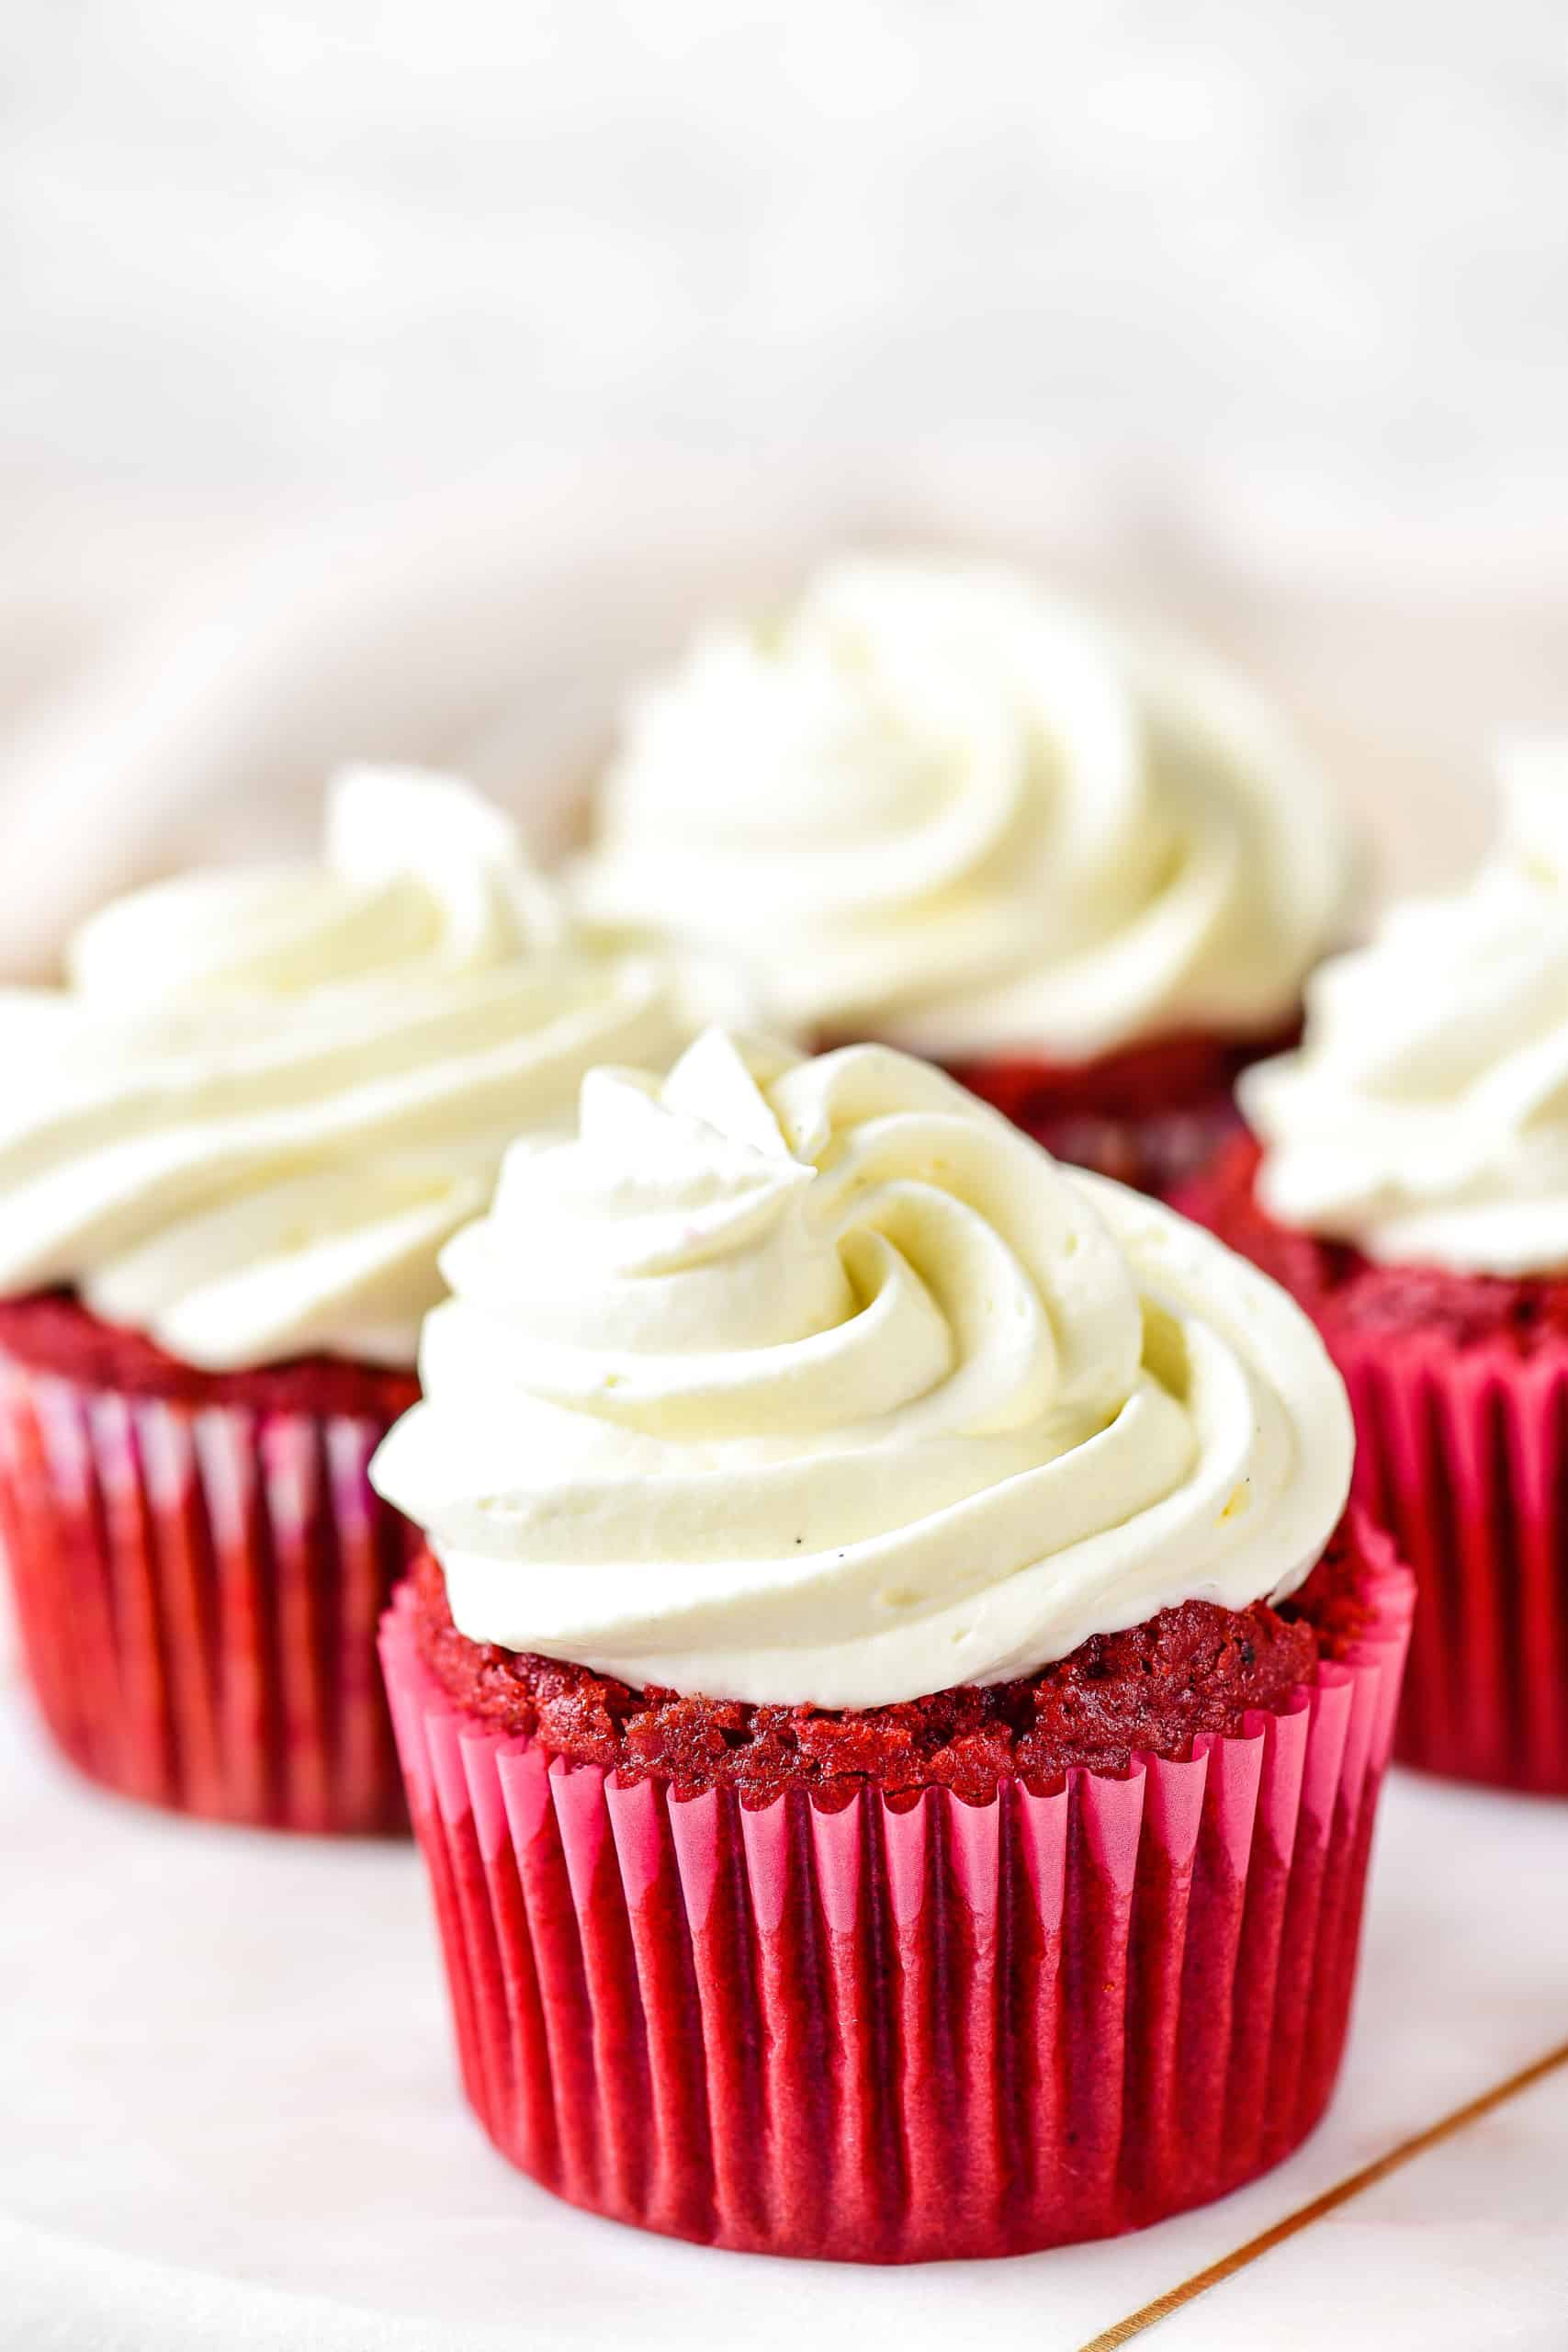 Up close shot of a red velvet cupcake with frosting.